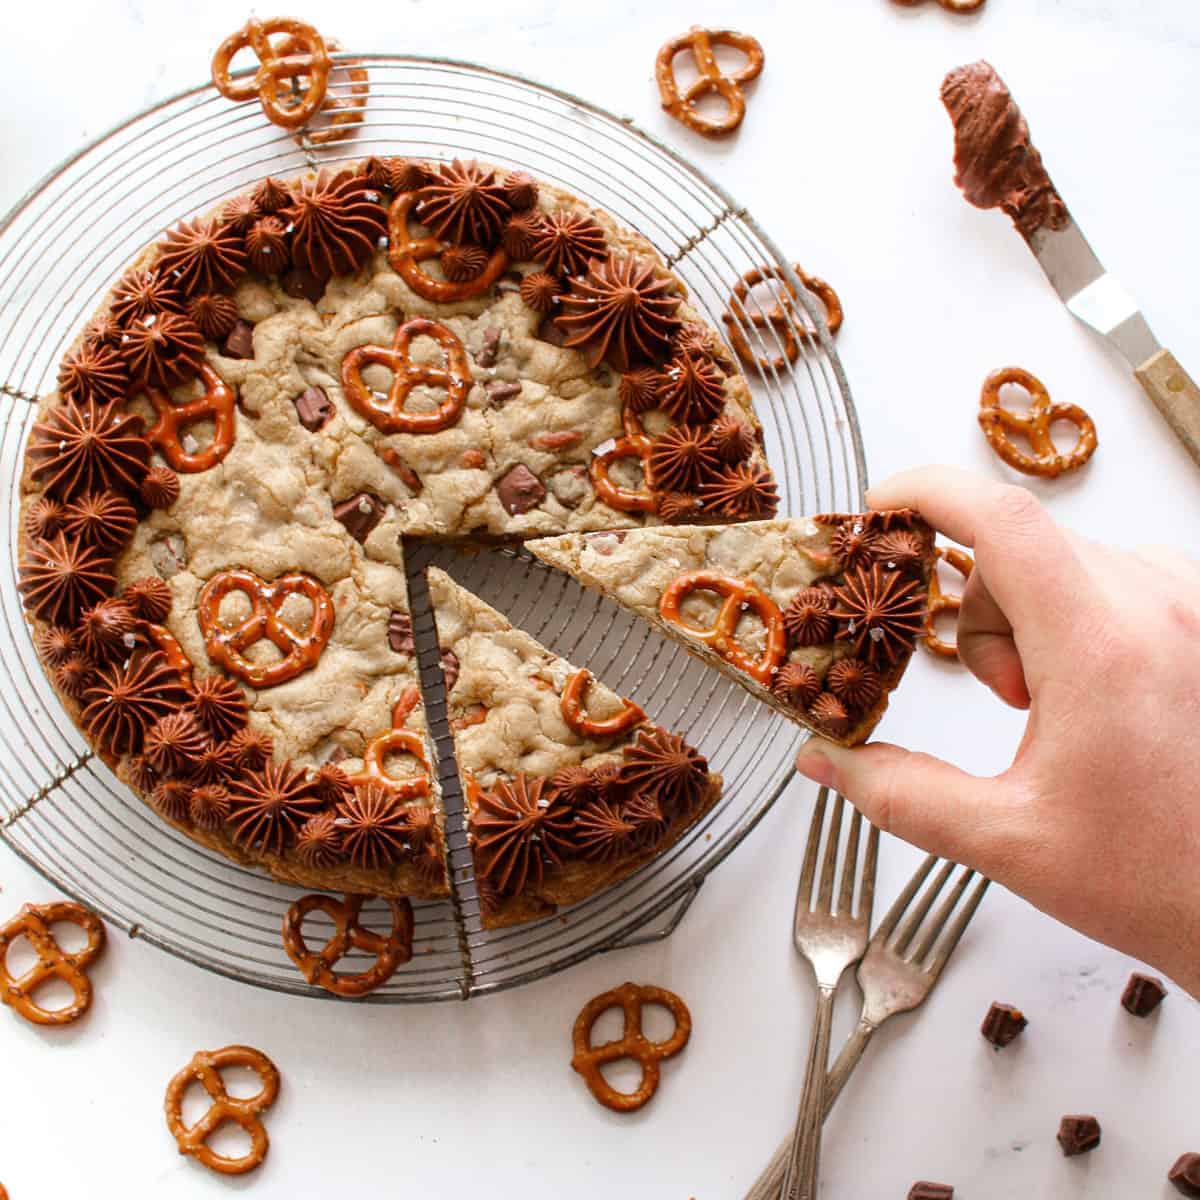 Square photo of Salted Caramel Chocolate Pretzel Cookie Cake with ¼ of the cookie cake cut into 2 slices on an antique circle cooling rack. A hand is picking up 1 of the slices. Mini pretzels scattered around, on the left a small offset spatula with leftover frosting in the top right, bottom right are 2 antique forks crossed slightly and caramel truffle chips scattered in bottom right next to the forks.